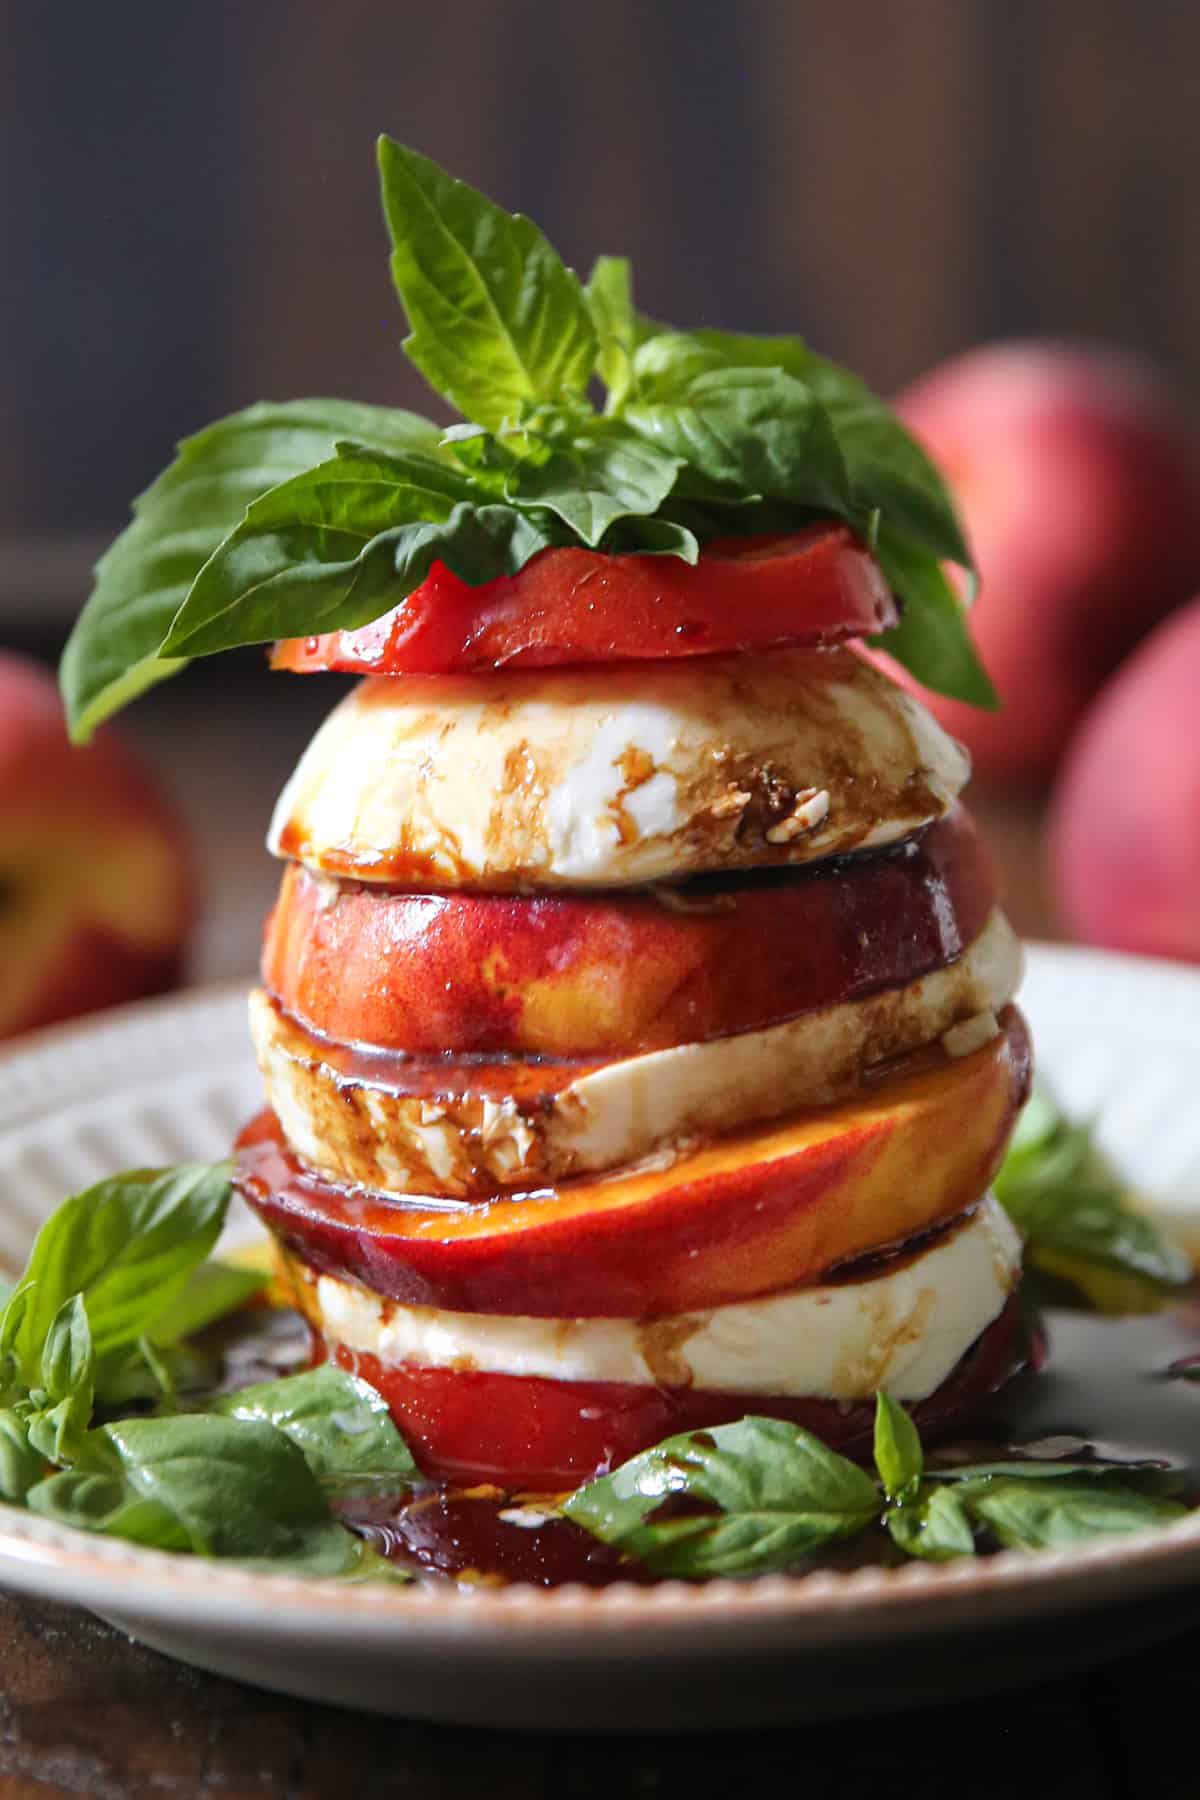 Peach Tomato Caprese Salad with Basil, Balsamic Glaze, and Olive oil (a stack)